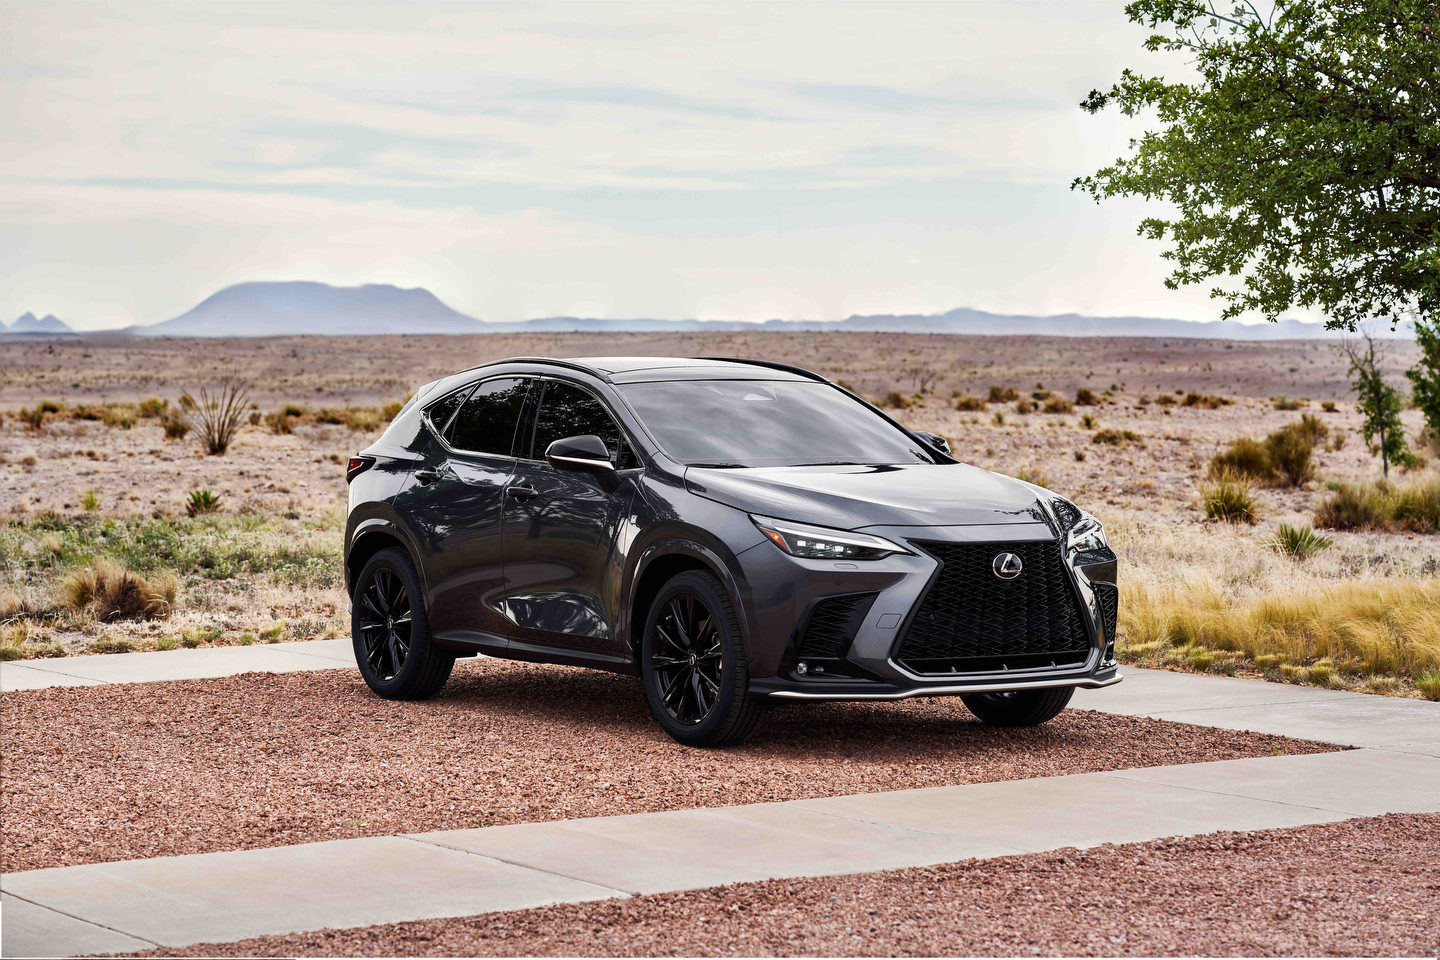 2022 Lexus NX 350 F SPORT: Improved in every way